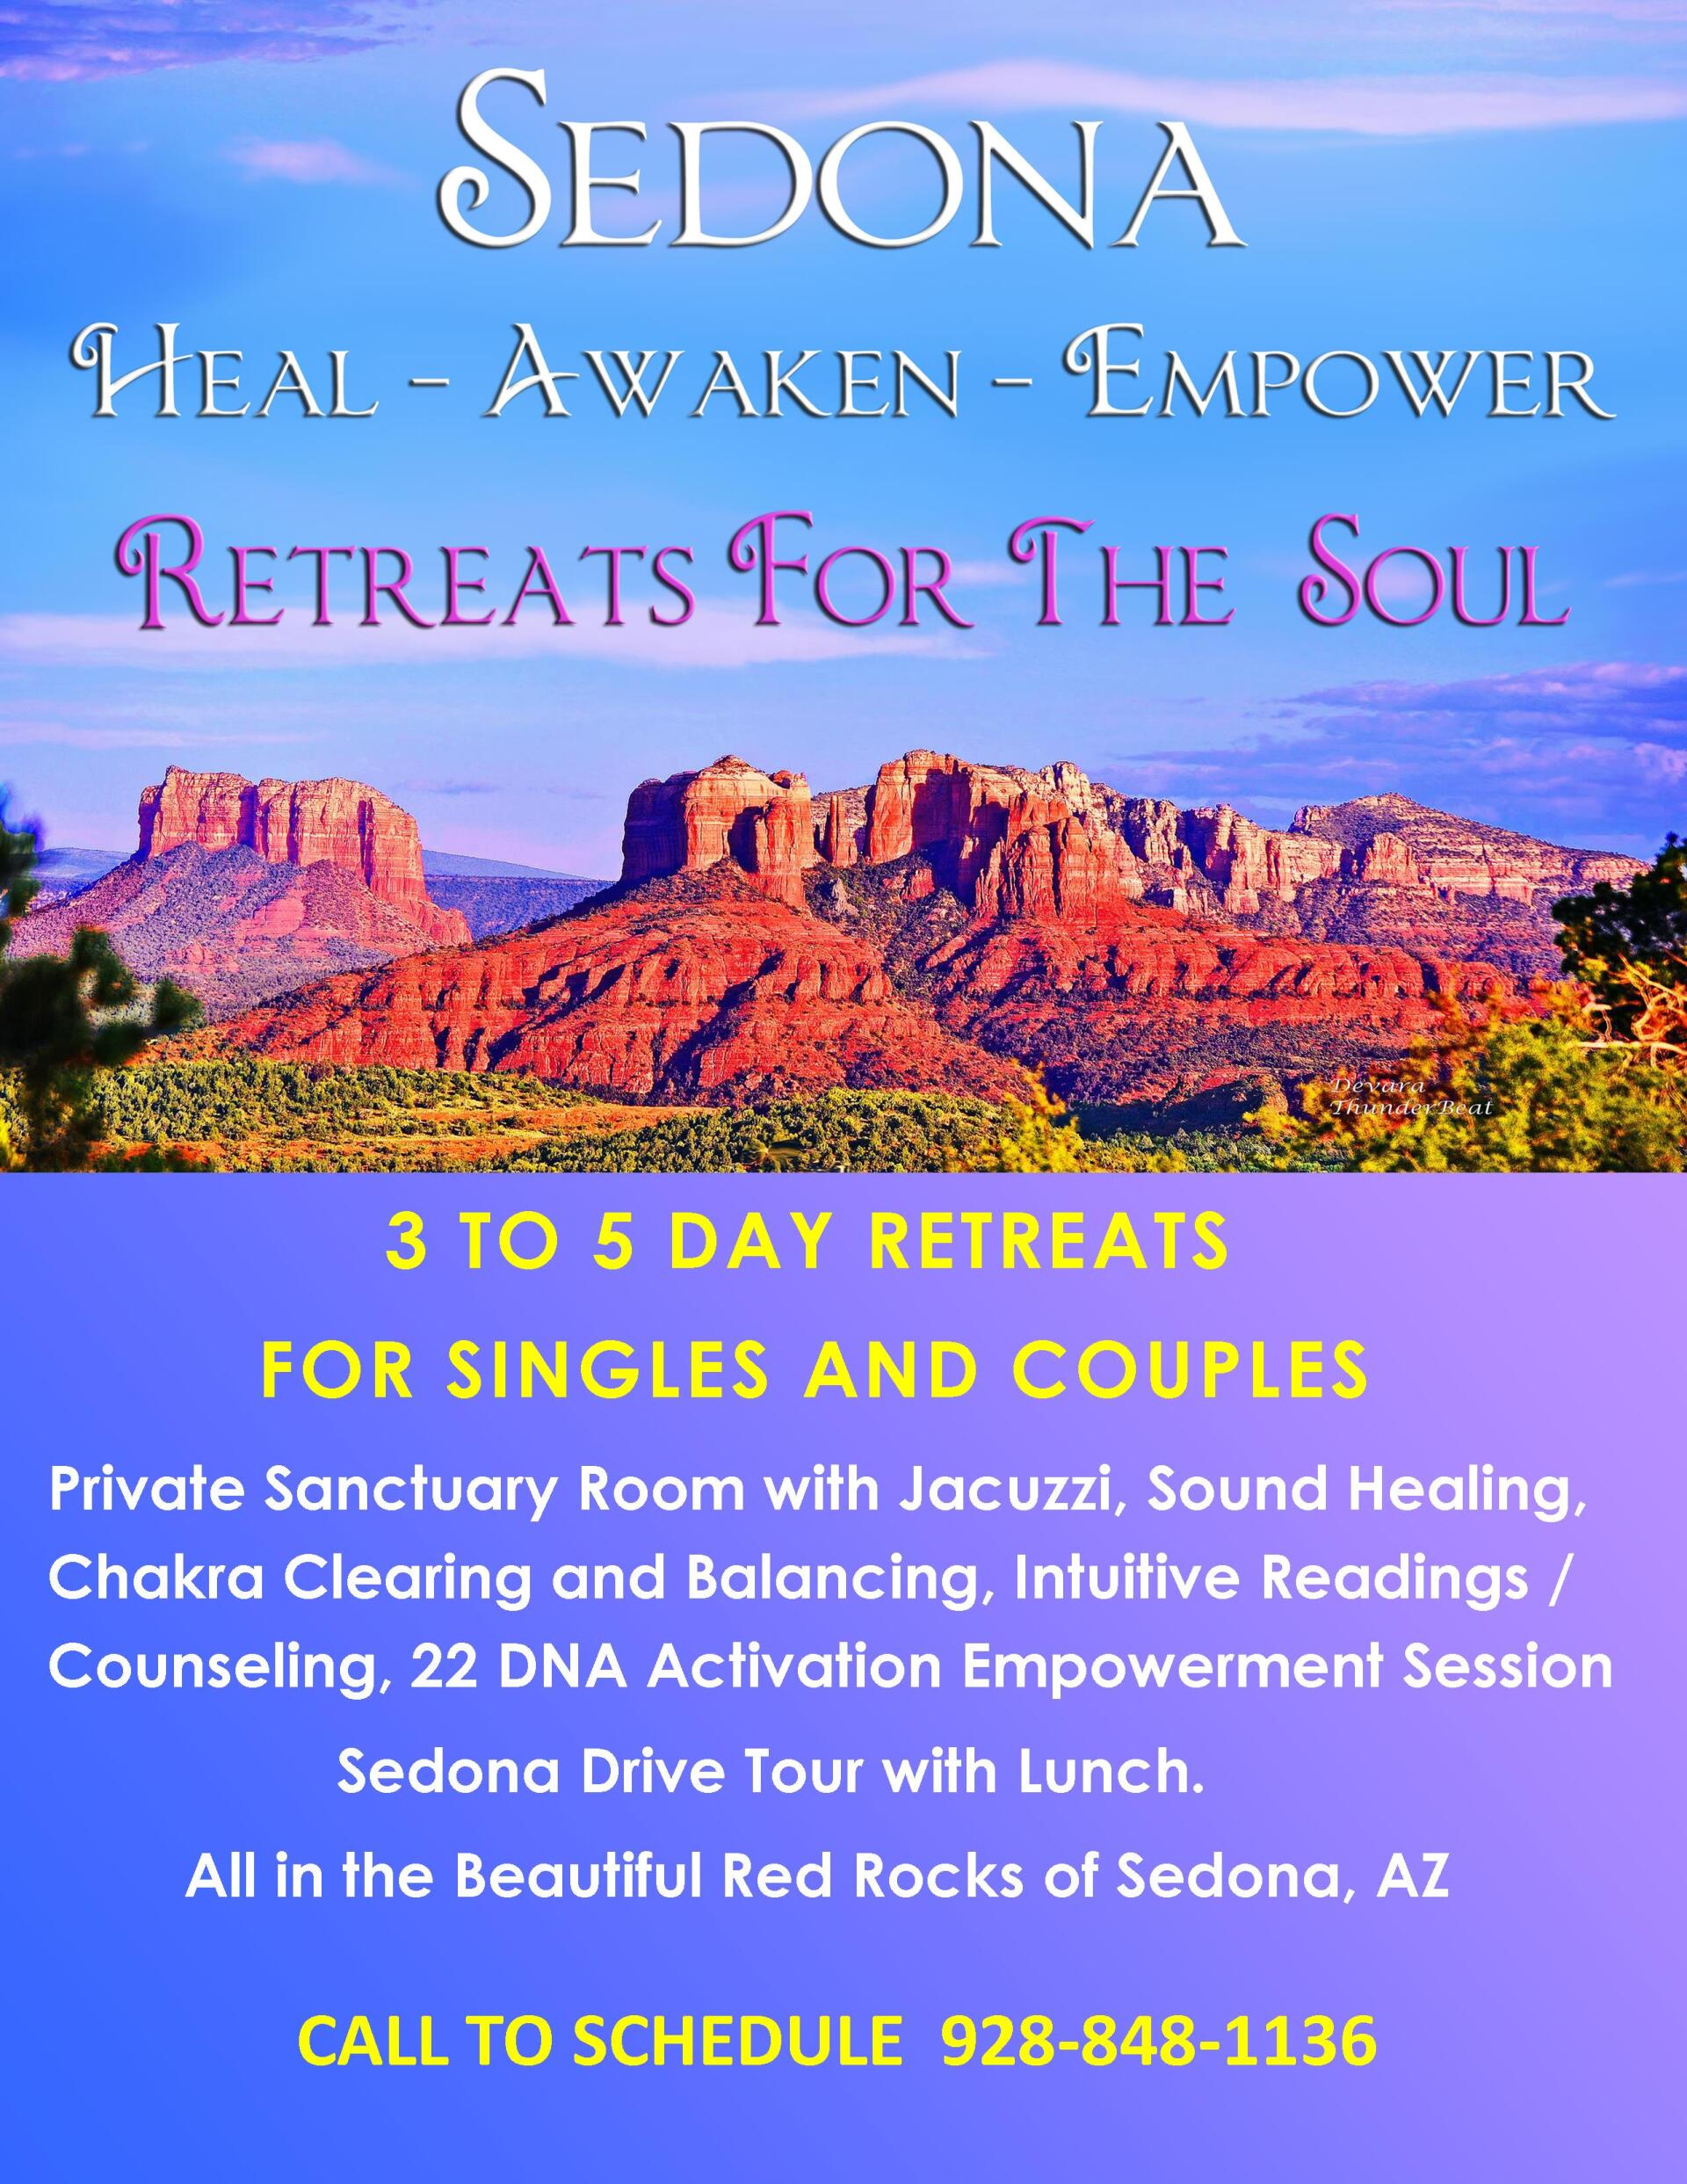 Retreats for the soul image